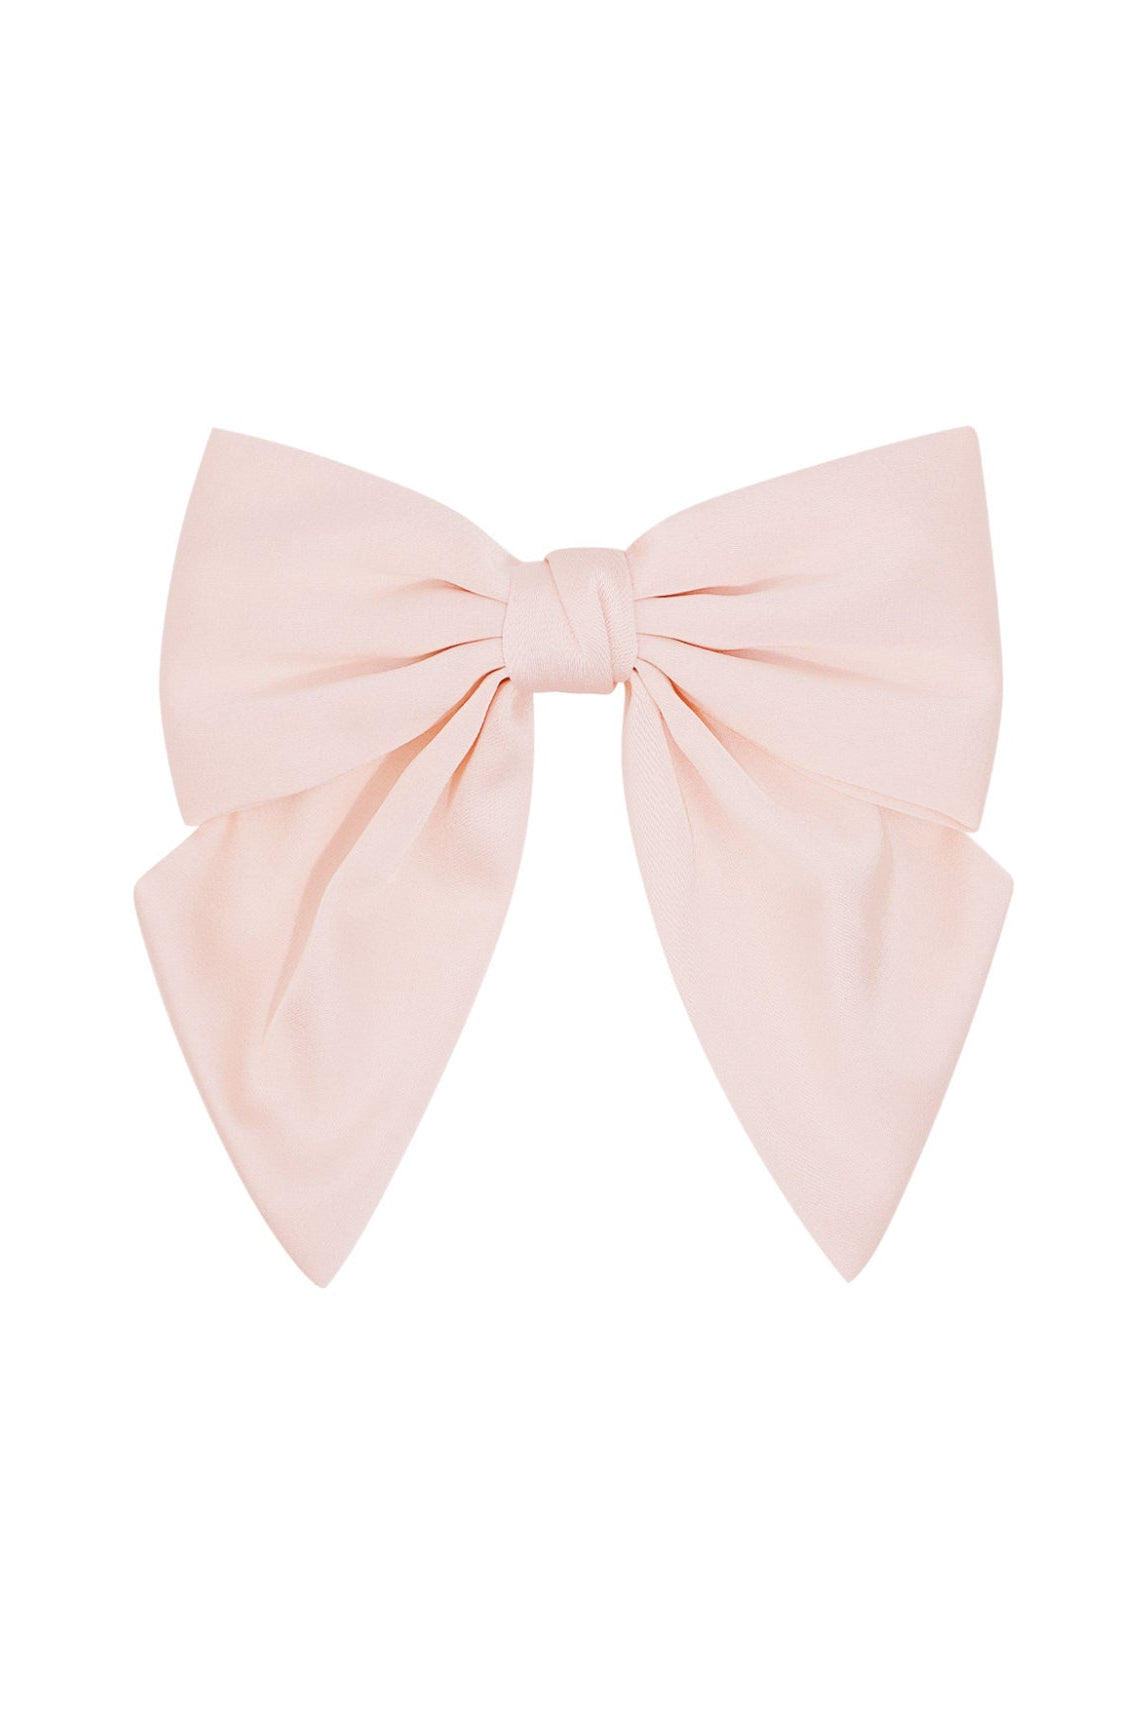 HAIRBOW BABY PINK - My Favourites